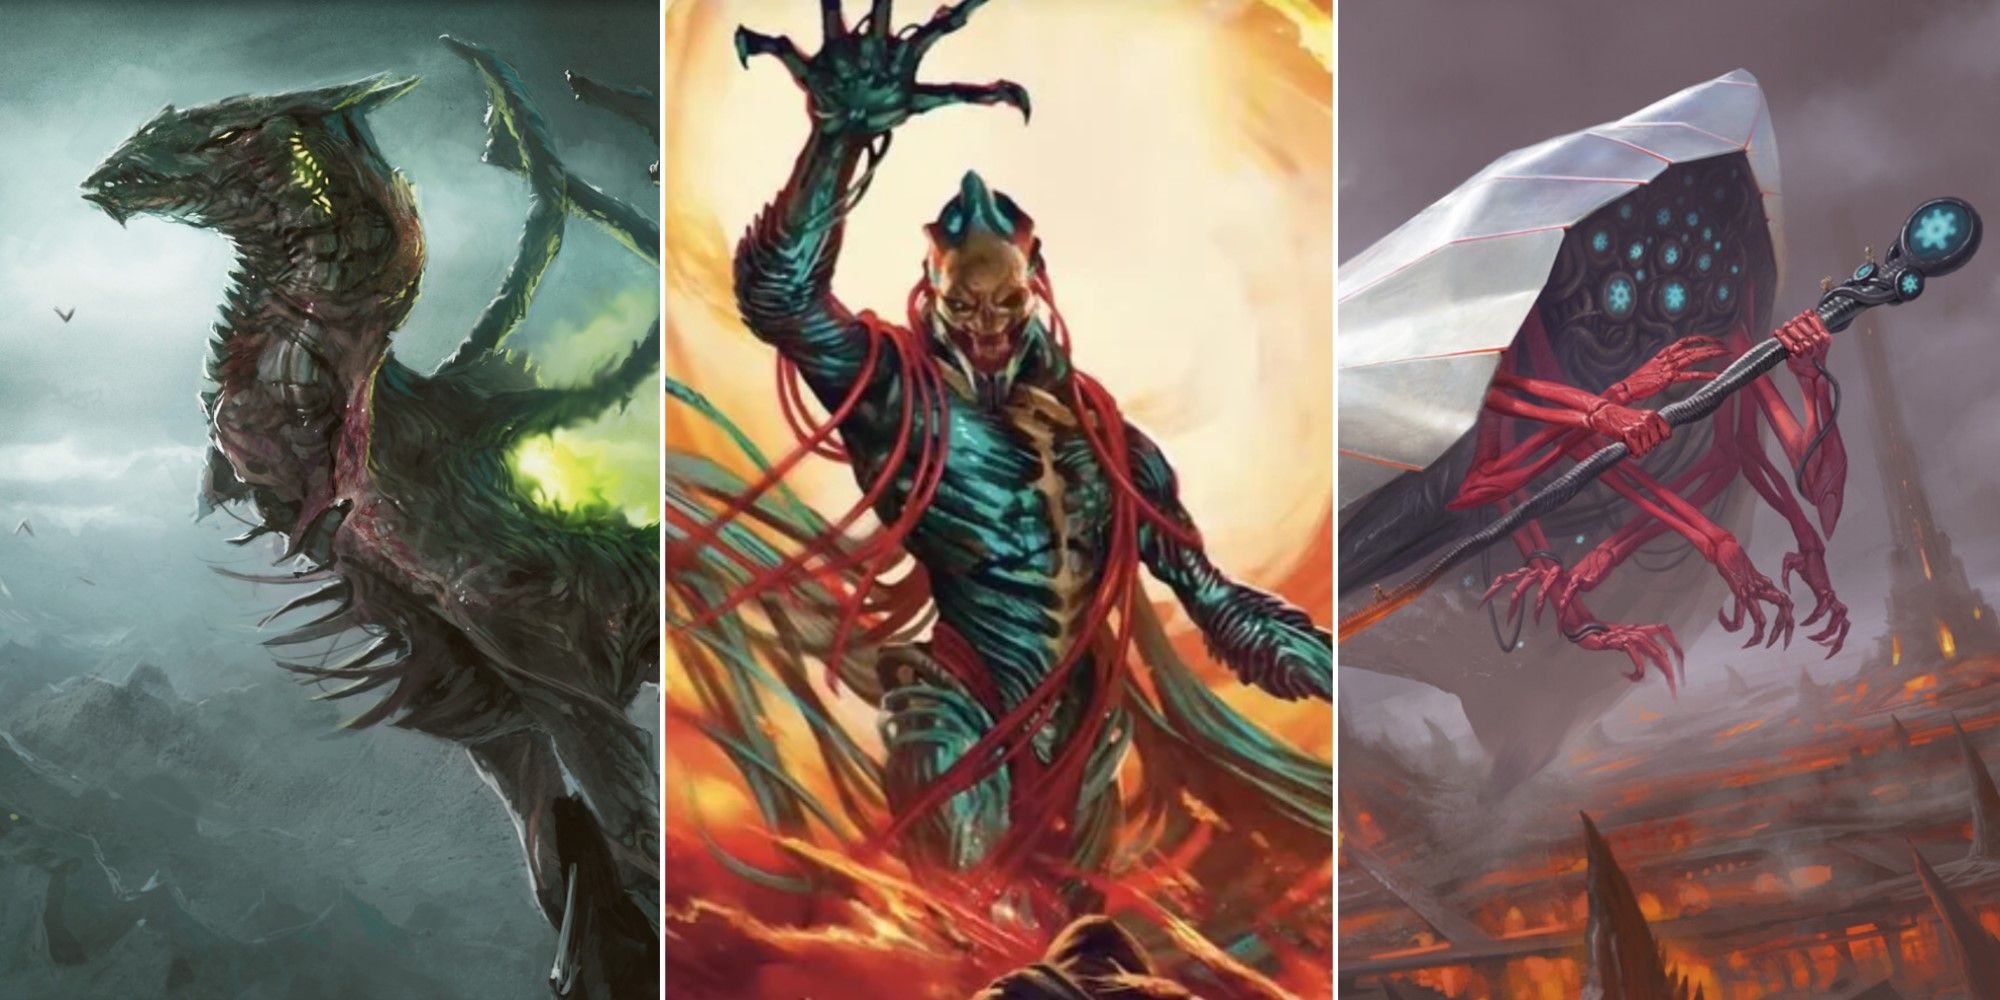 Artwork from three different legendary Phyrexian creatures in Magic: The Gathering.